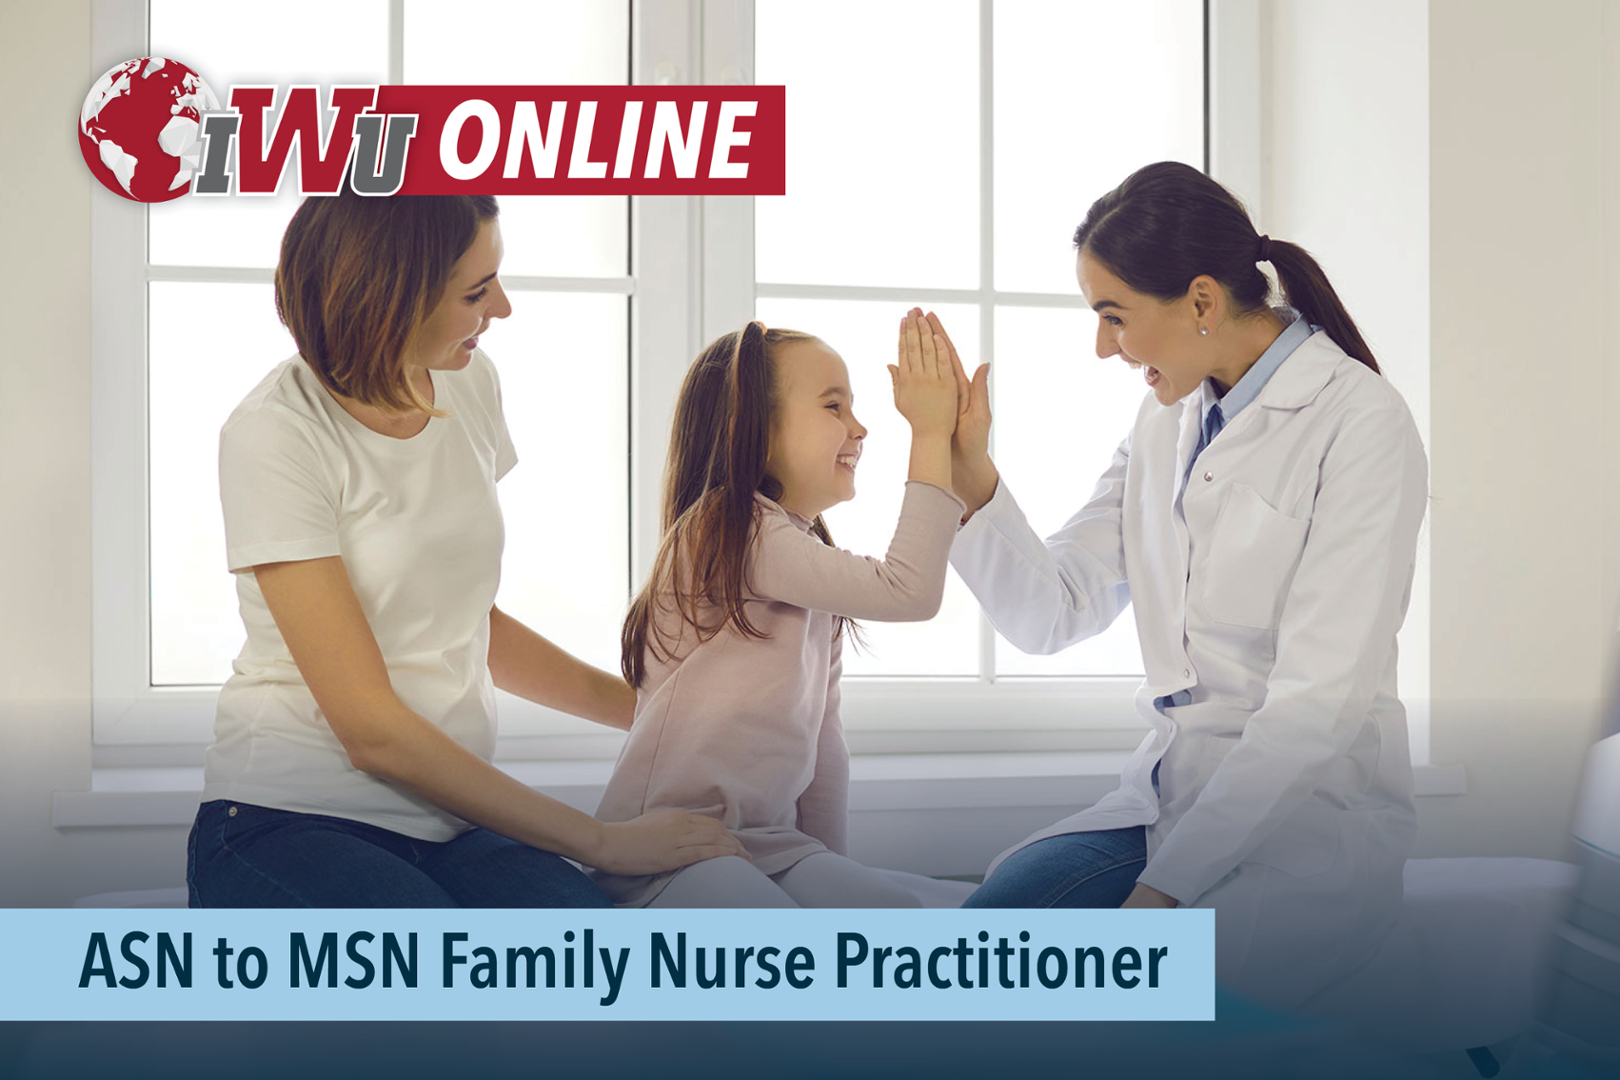 IWU Announces ASN to MSN Track with Family Nurse Practitioner Specialization